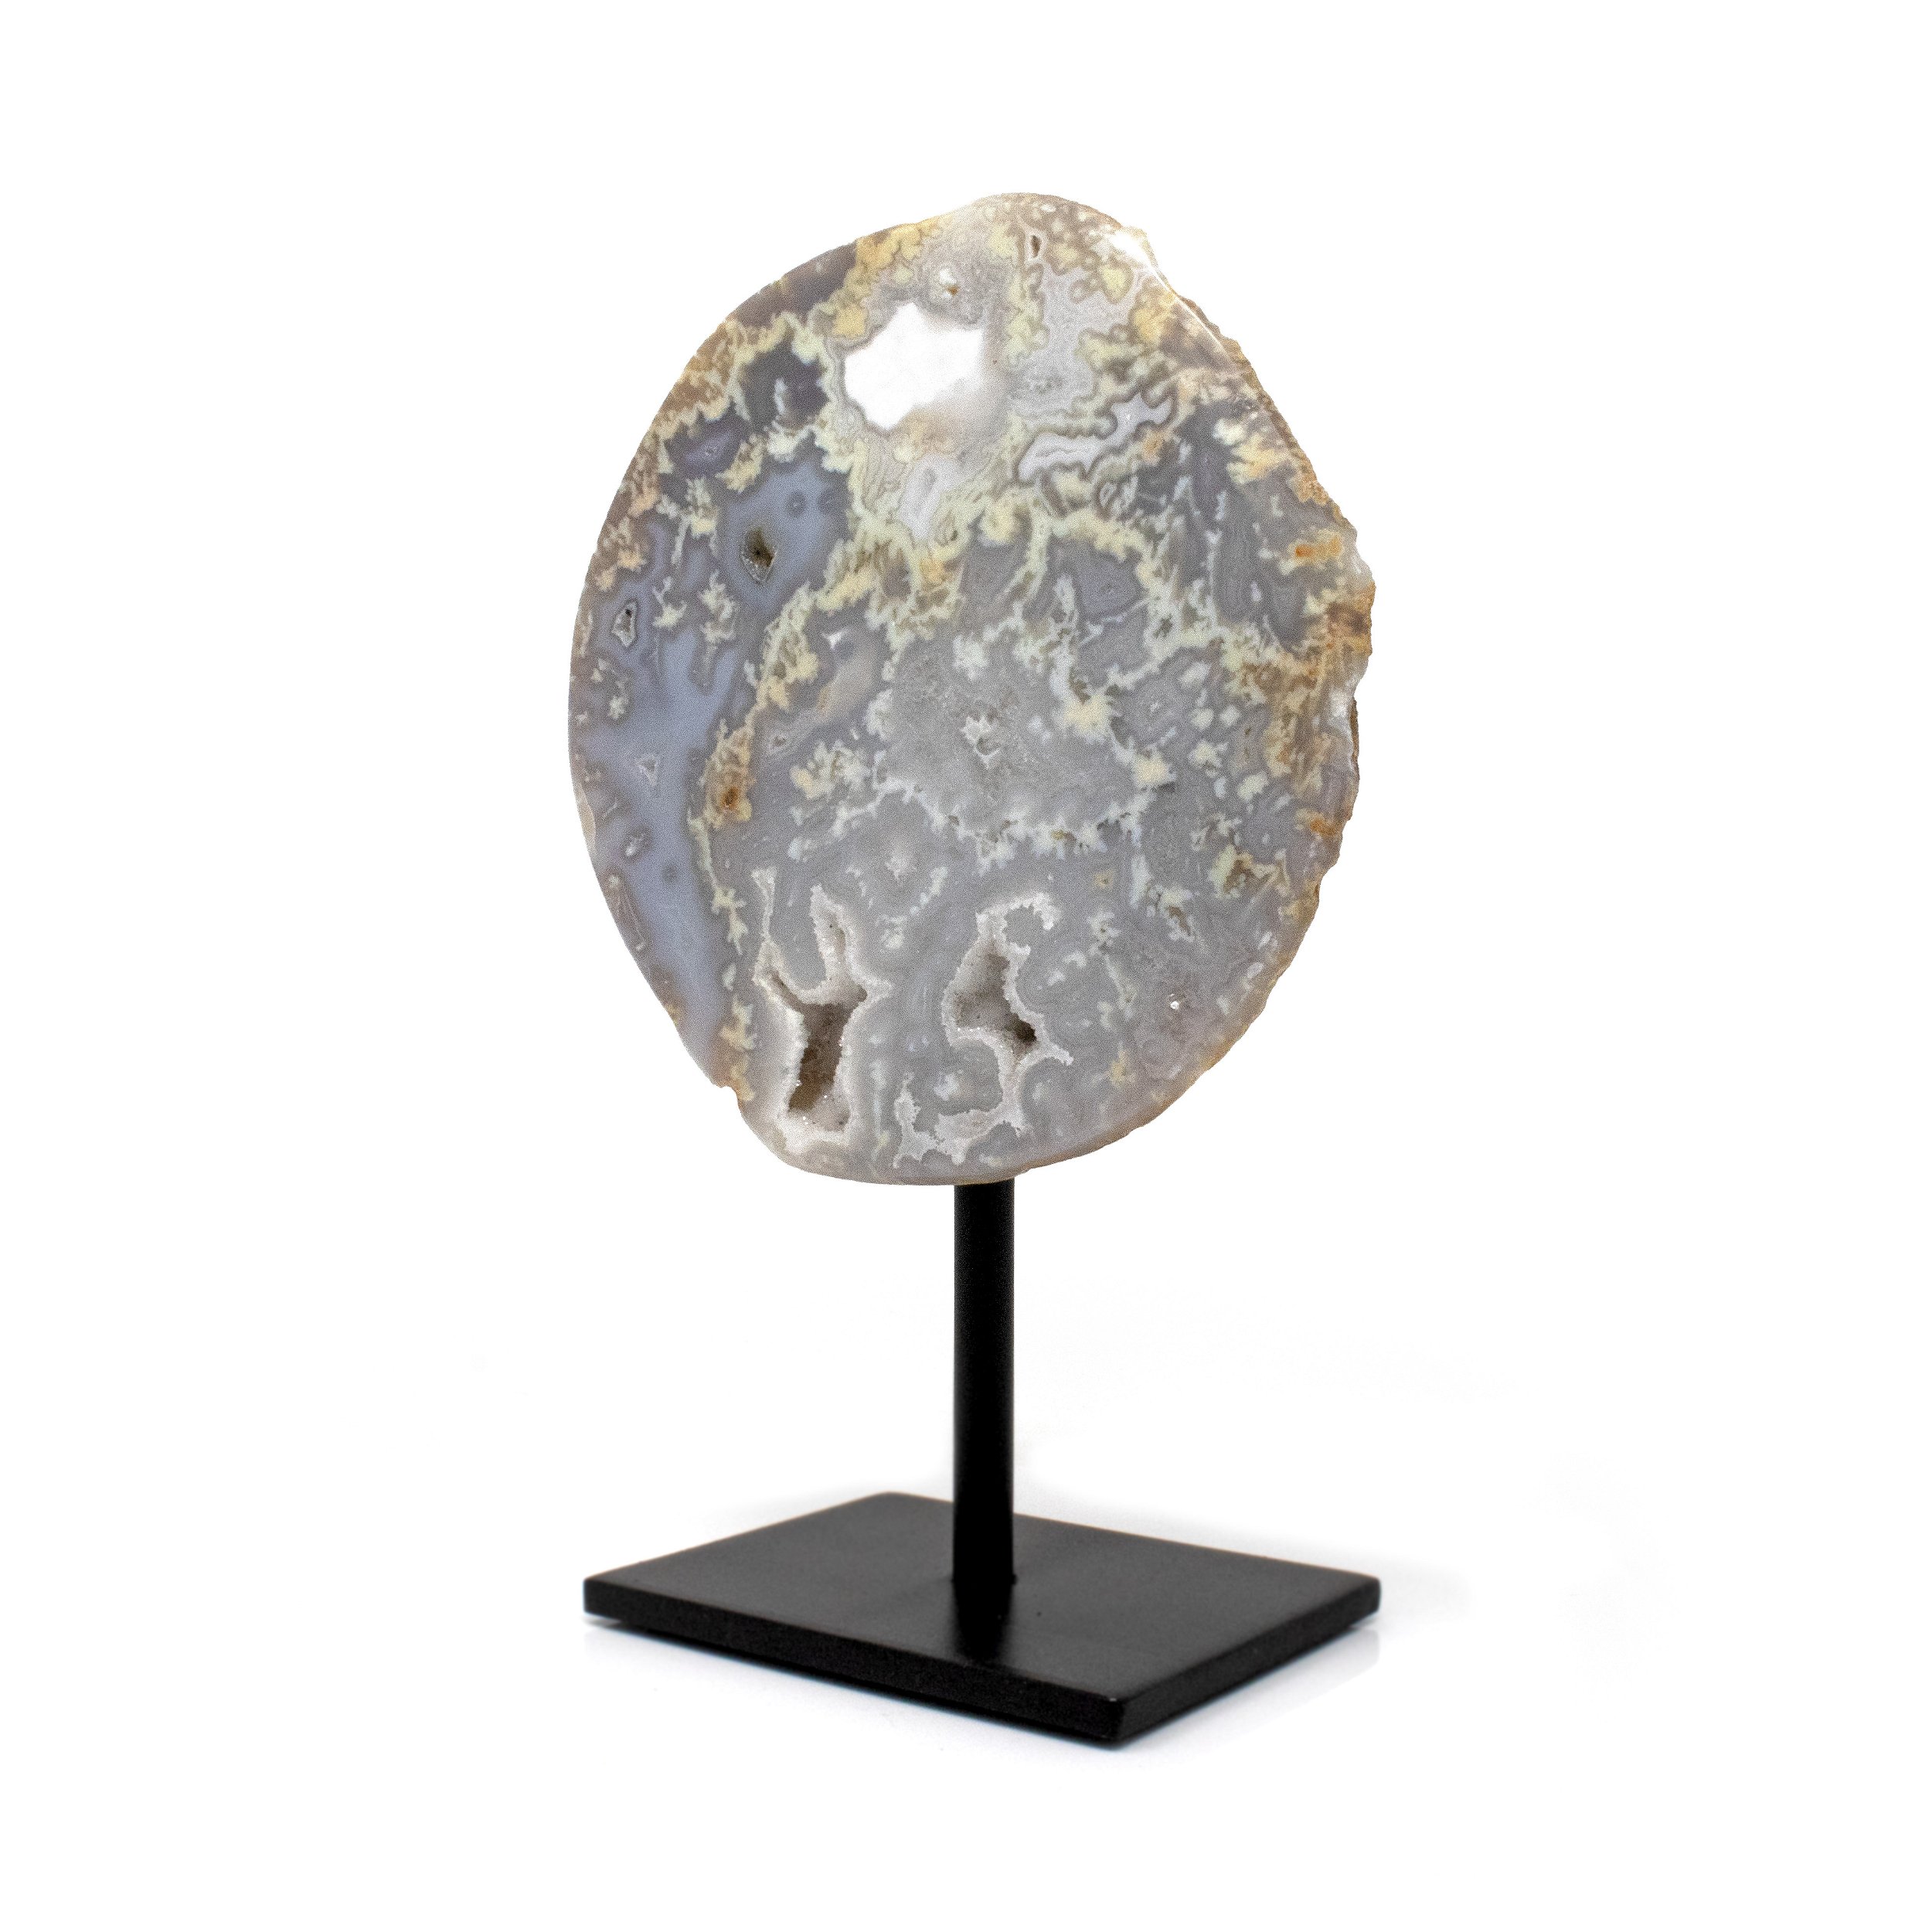 Druze Geode On Post Stand - Grayish Blue With Creams And Multiple Druze Pockets